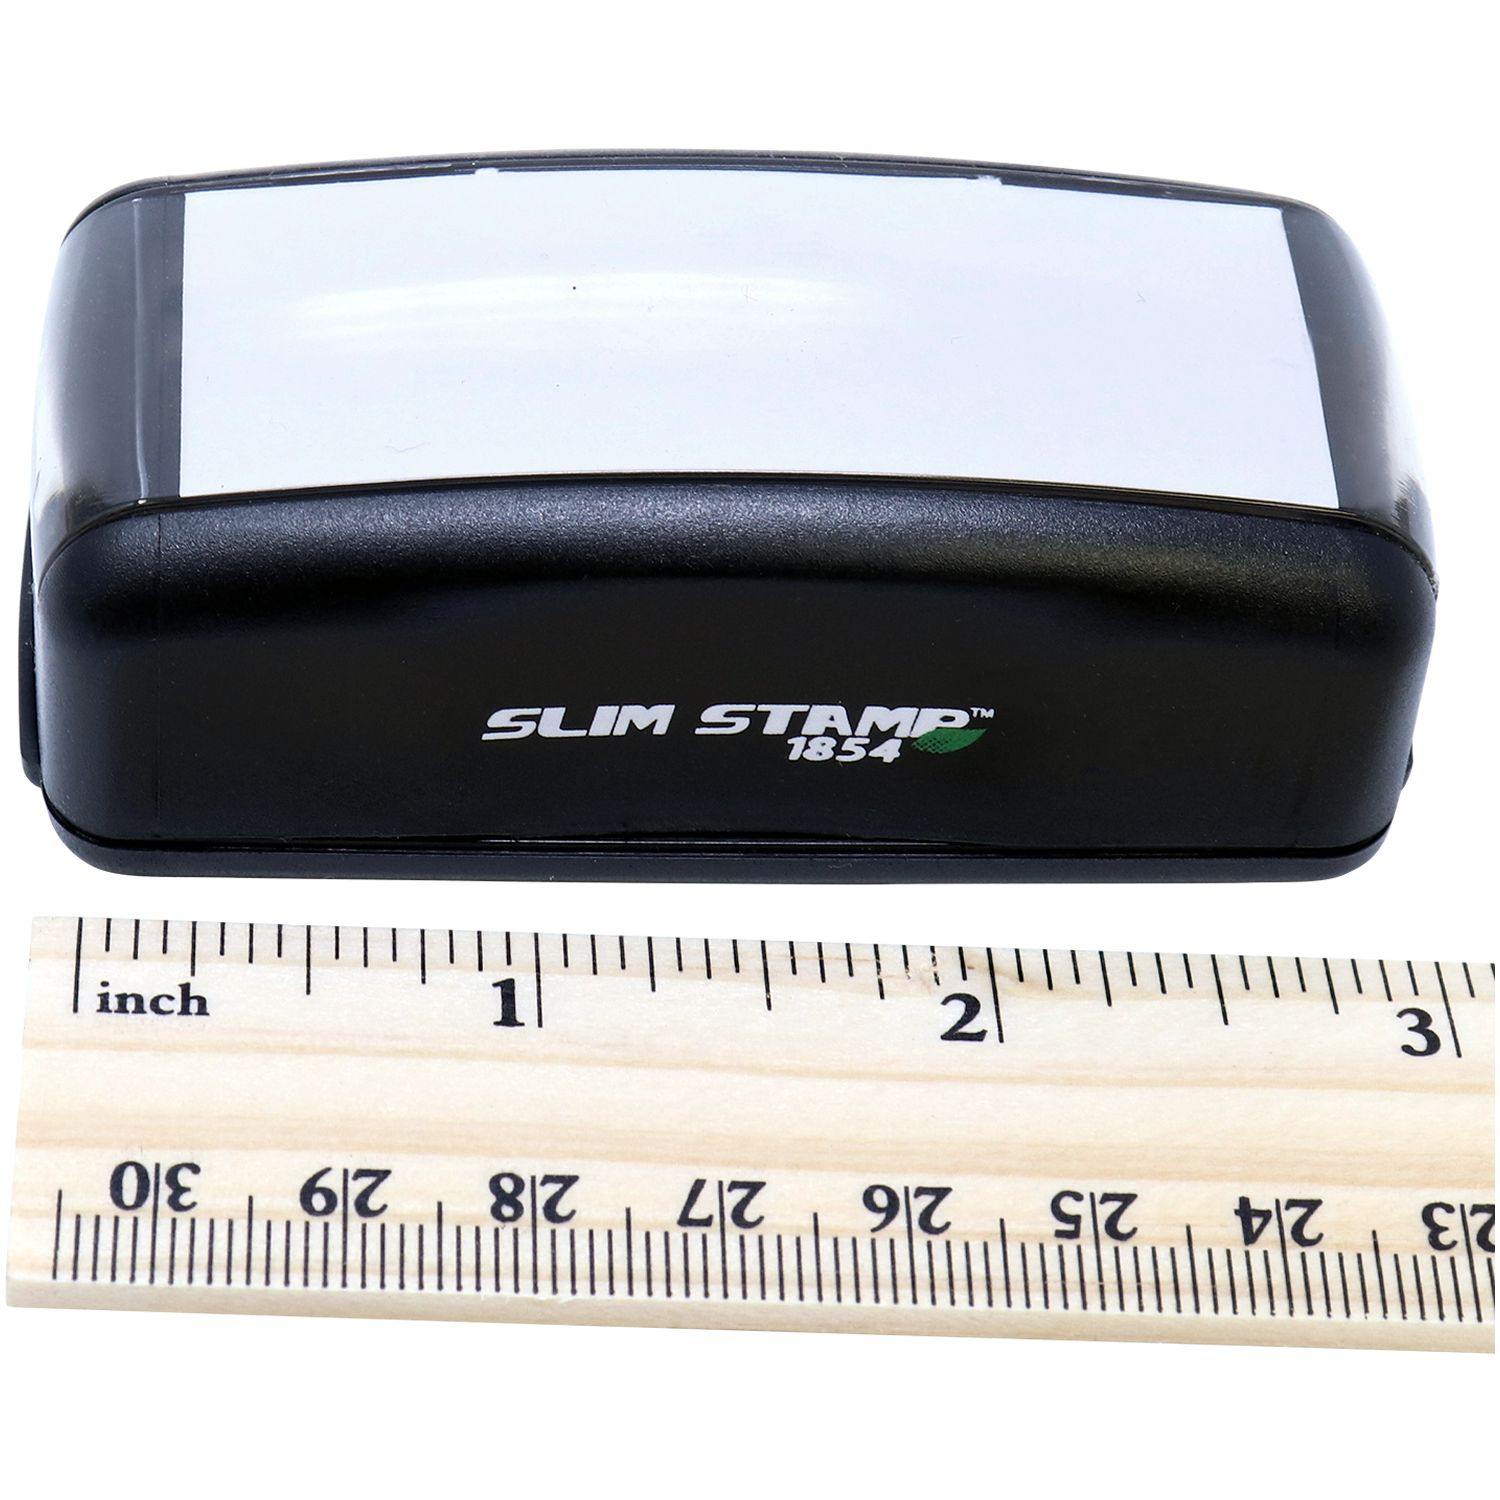 Measurement Large Pre-Inked Bold Copy Stamp with Ruler